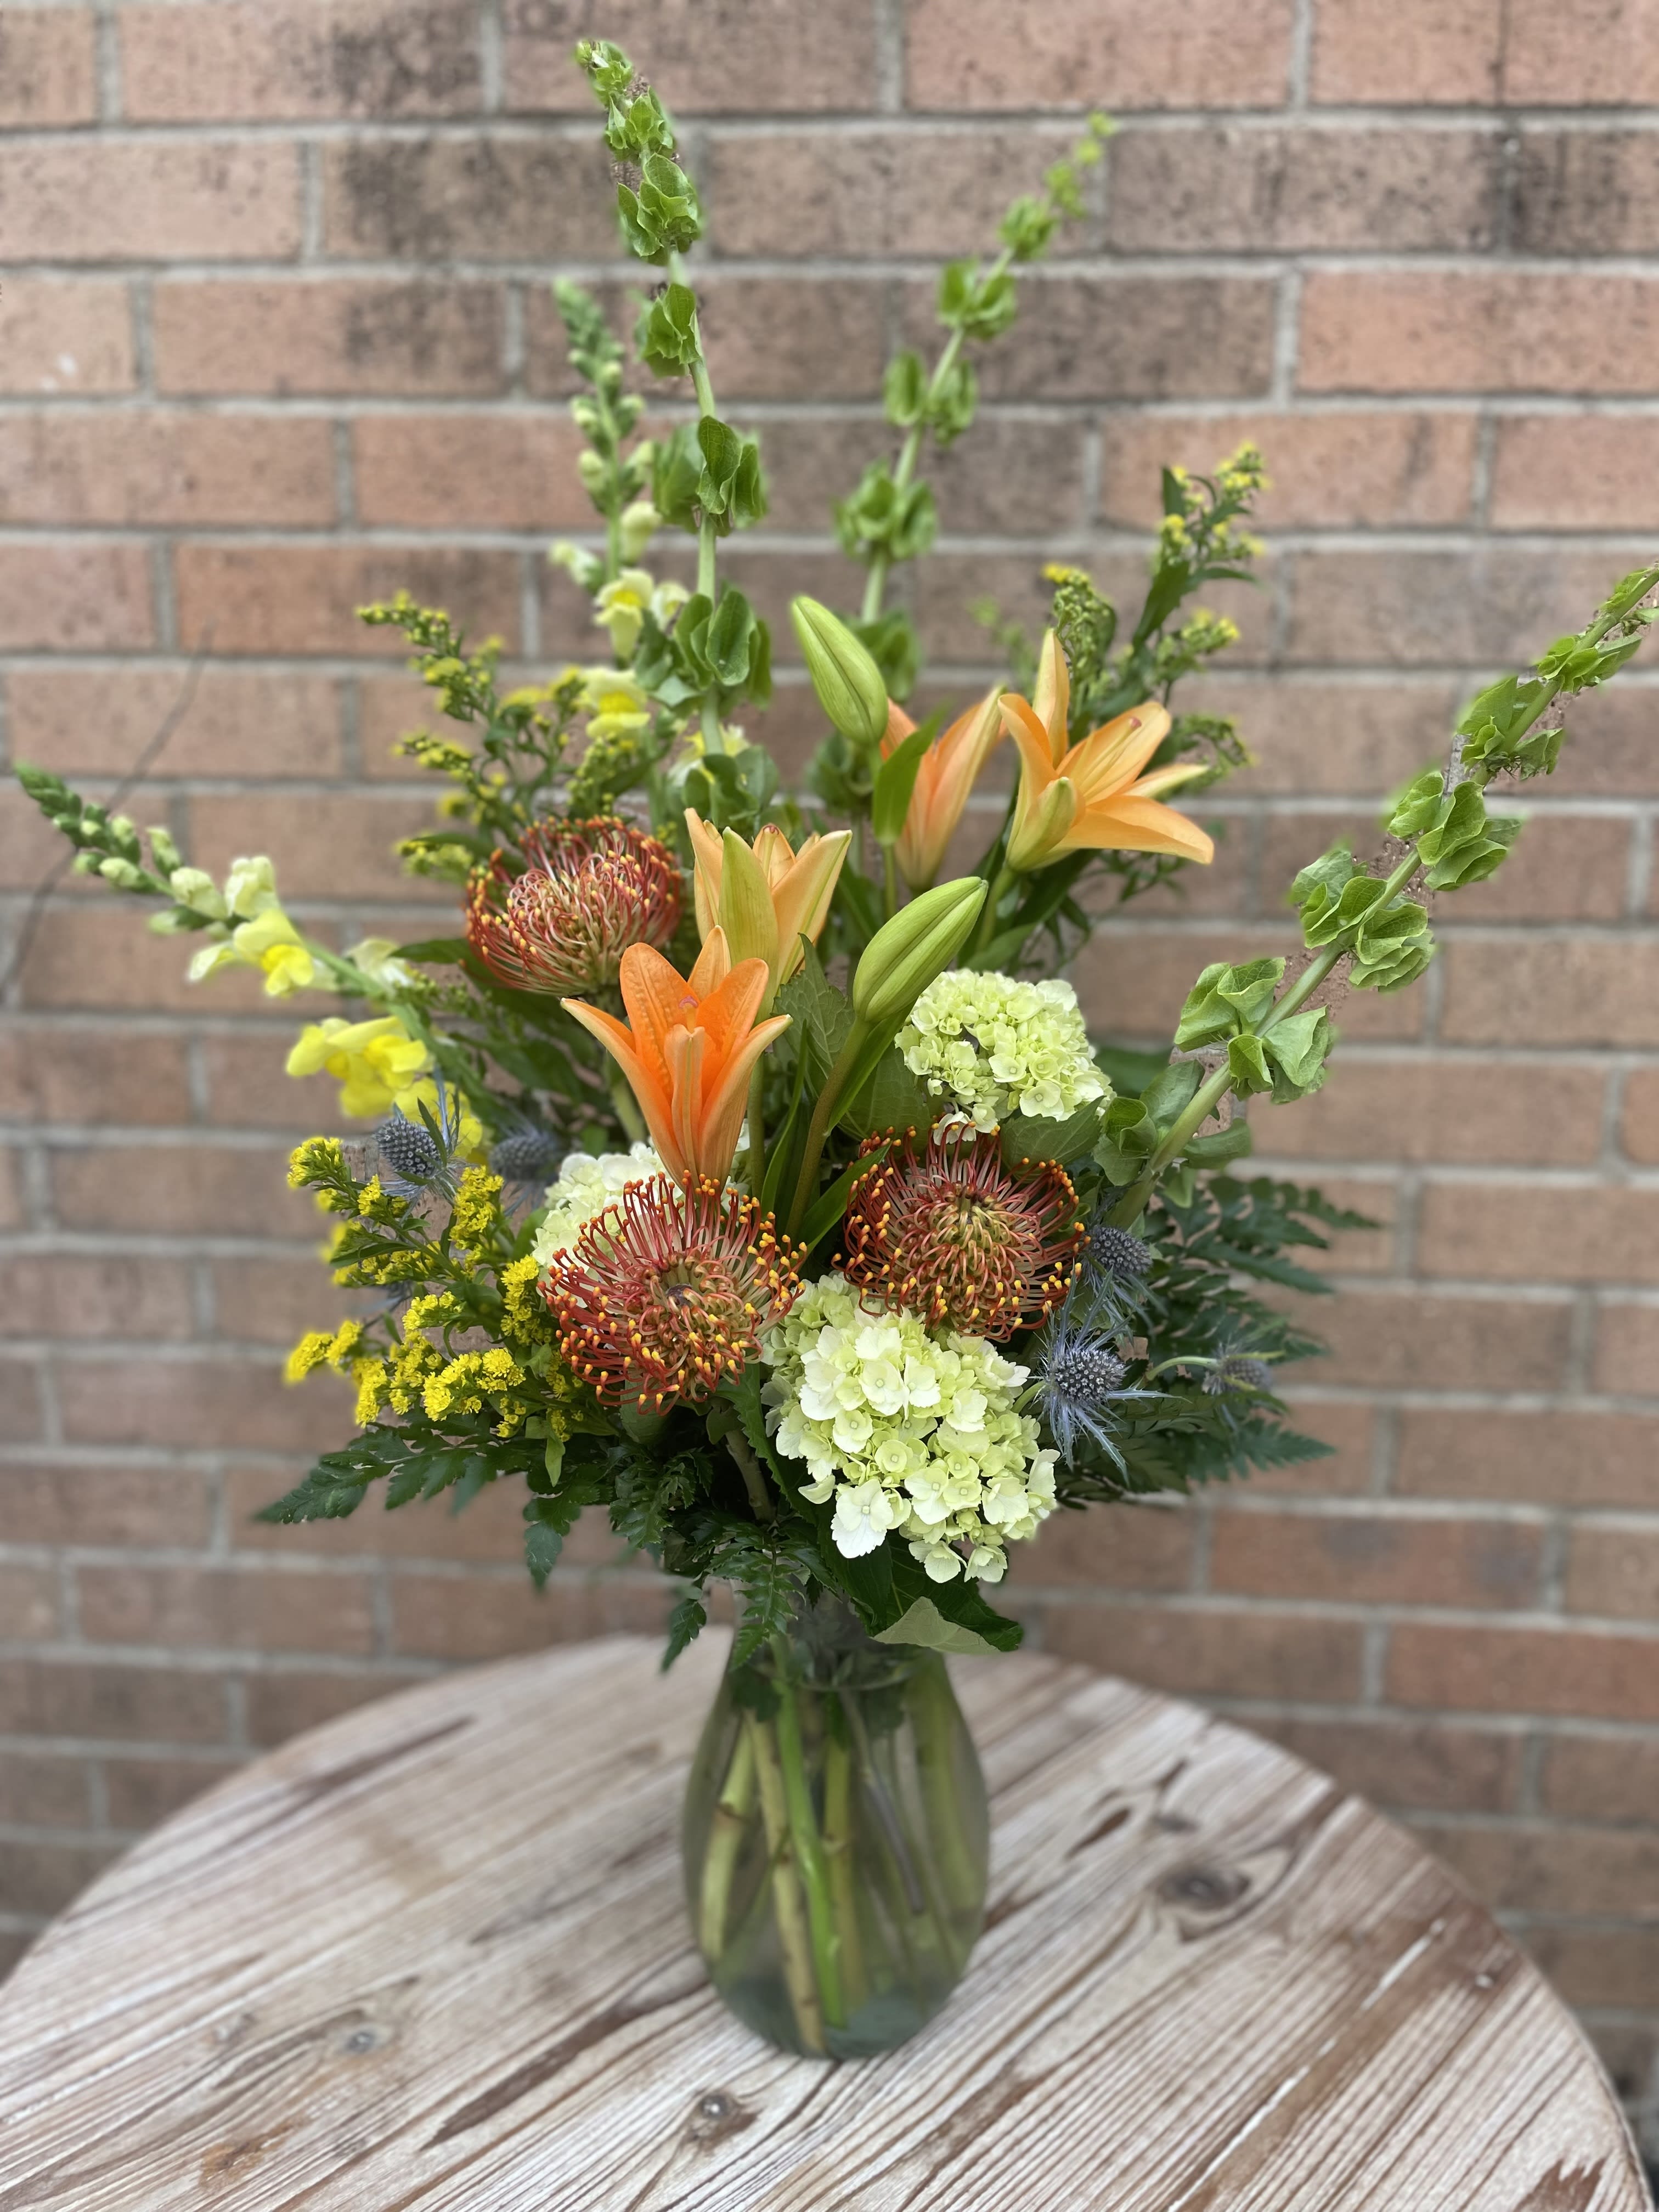 Majestic Sunrise - Imagine you're in a field enjoying a breathtaking sunrise. This bouquet will evoke those images for the recipient as they enjoy the bright colors of this striking arrangement.